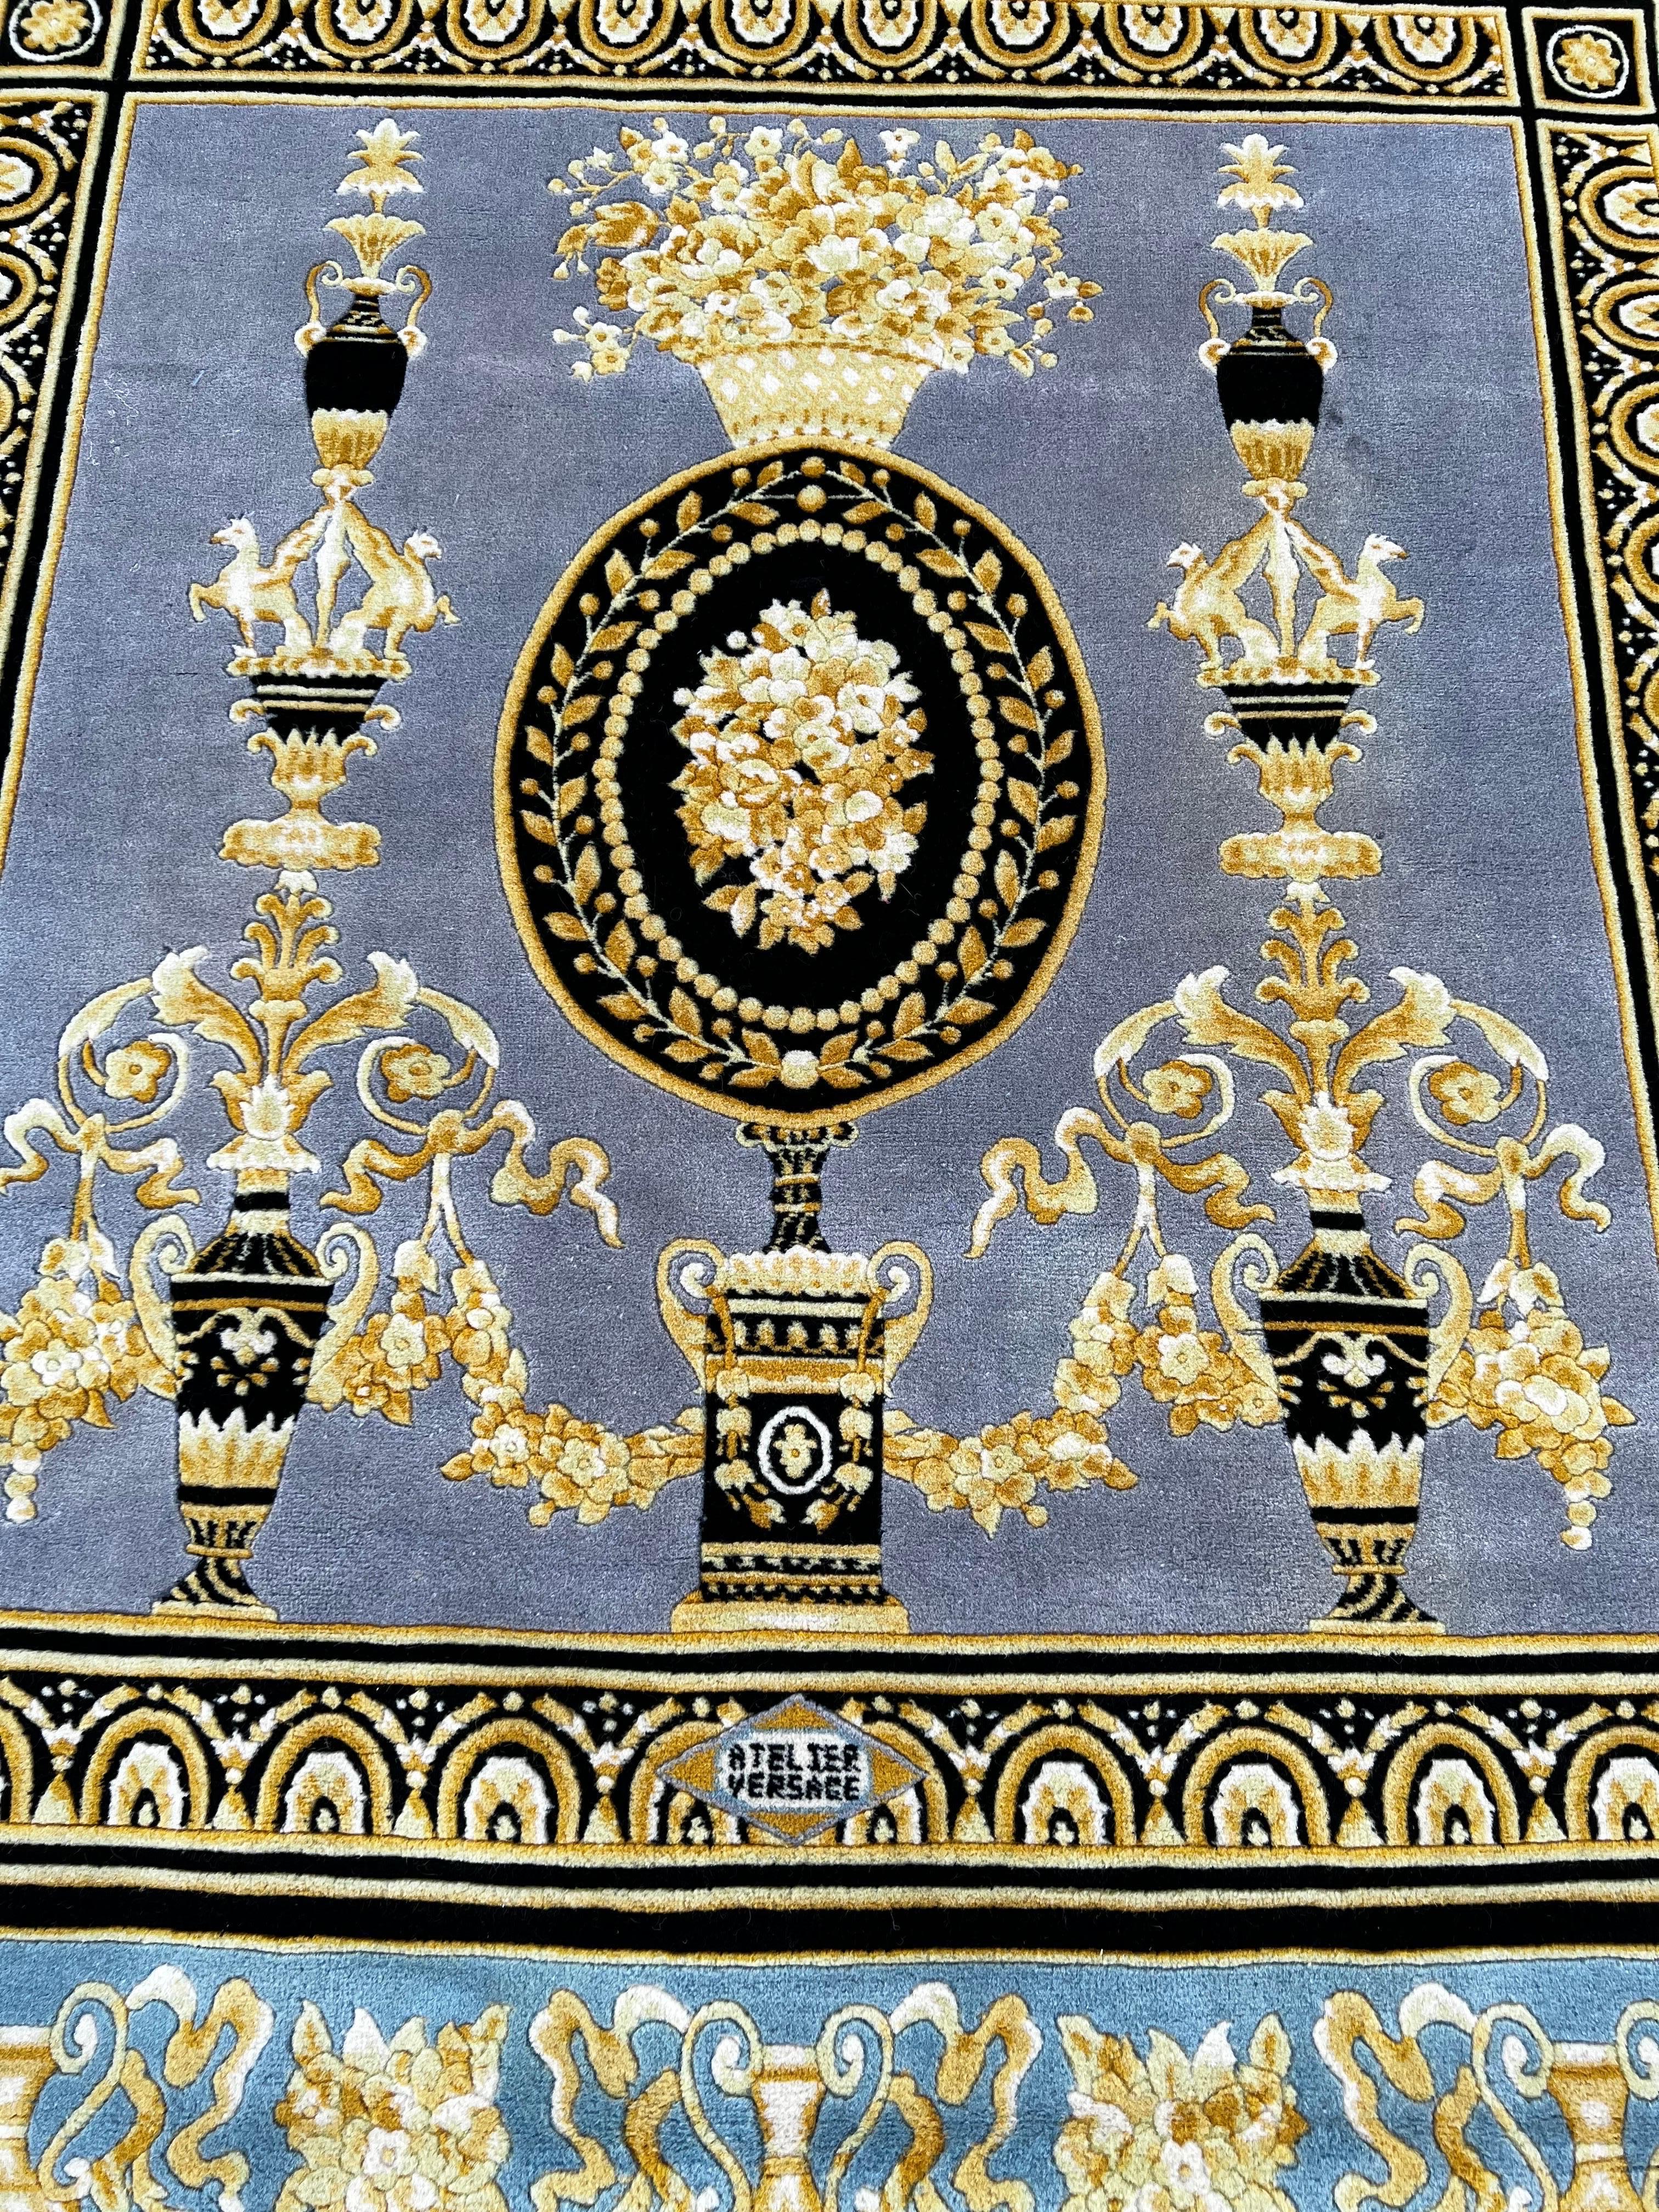 Gianni Versace Brocade Rug  In Excellent Condition For Sale In Scottsdale, AZ